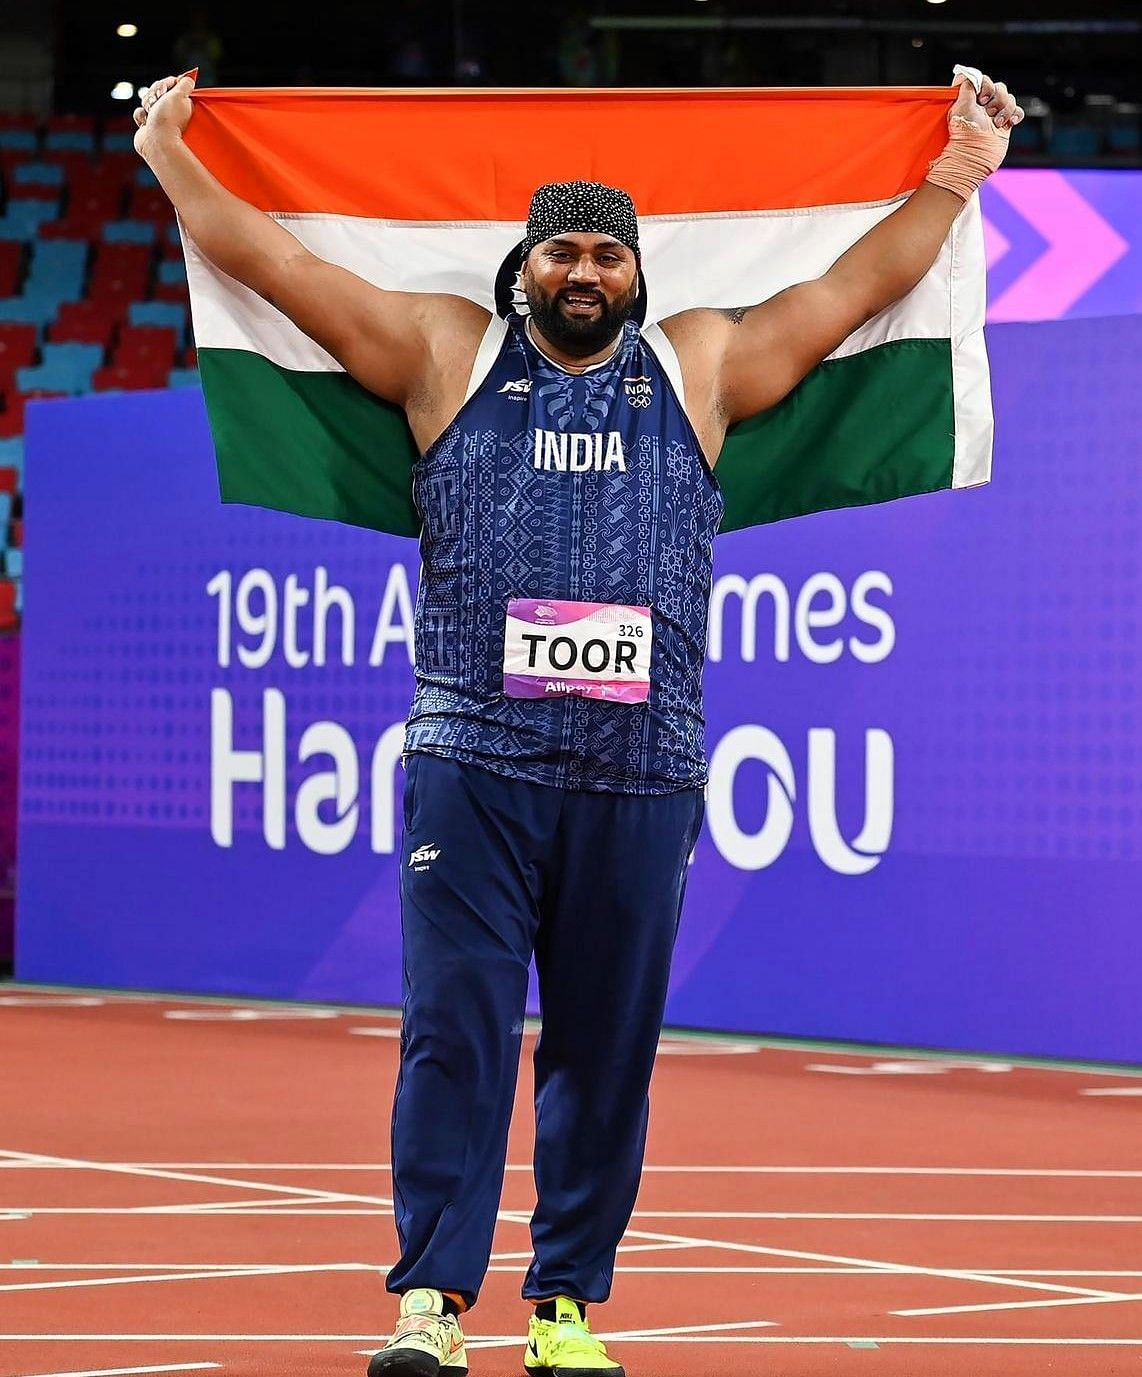 India&rsquo;s star thrower Tajinderpal Singh Toor wins back to back Asian Games titles. Photo credit: AFI